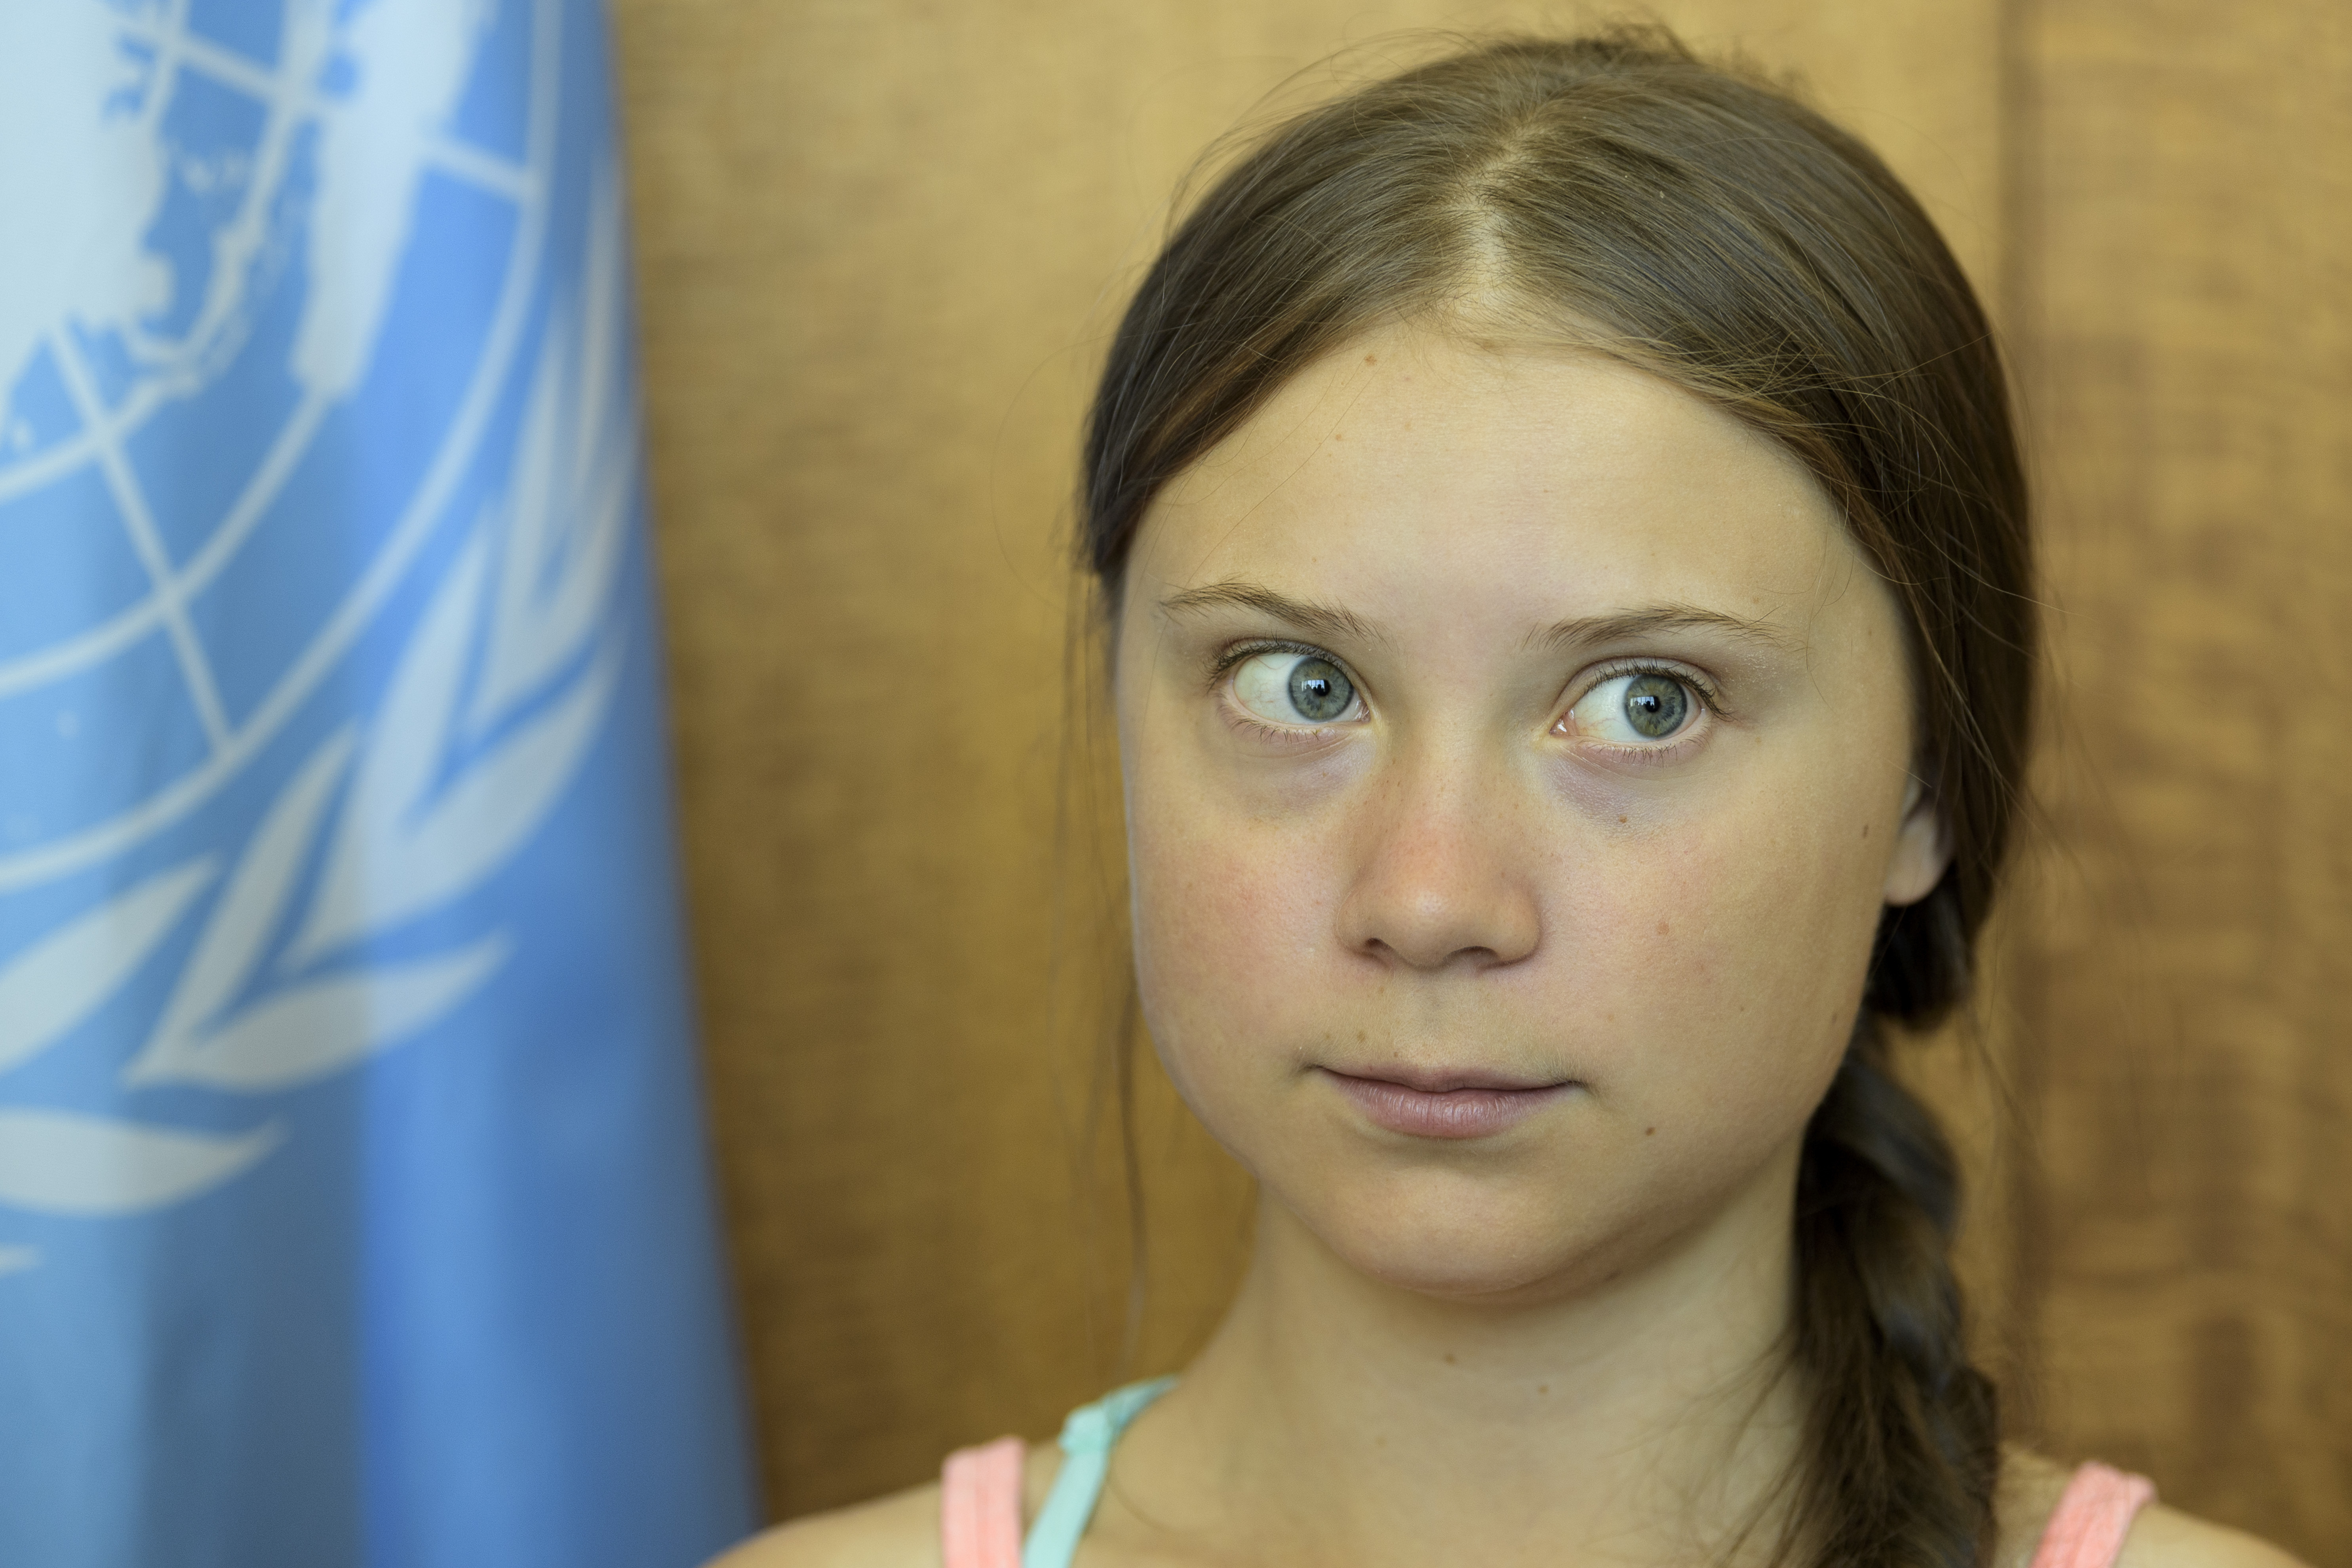 Greta Thunberg is winning hearts and minds — and some old men hate it | National ...